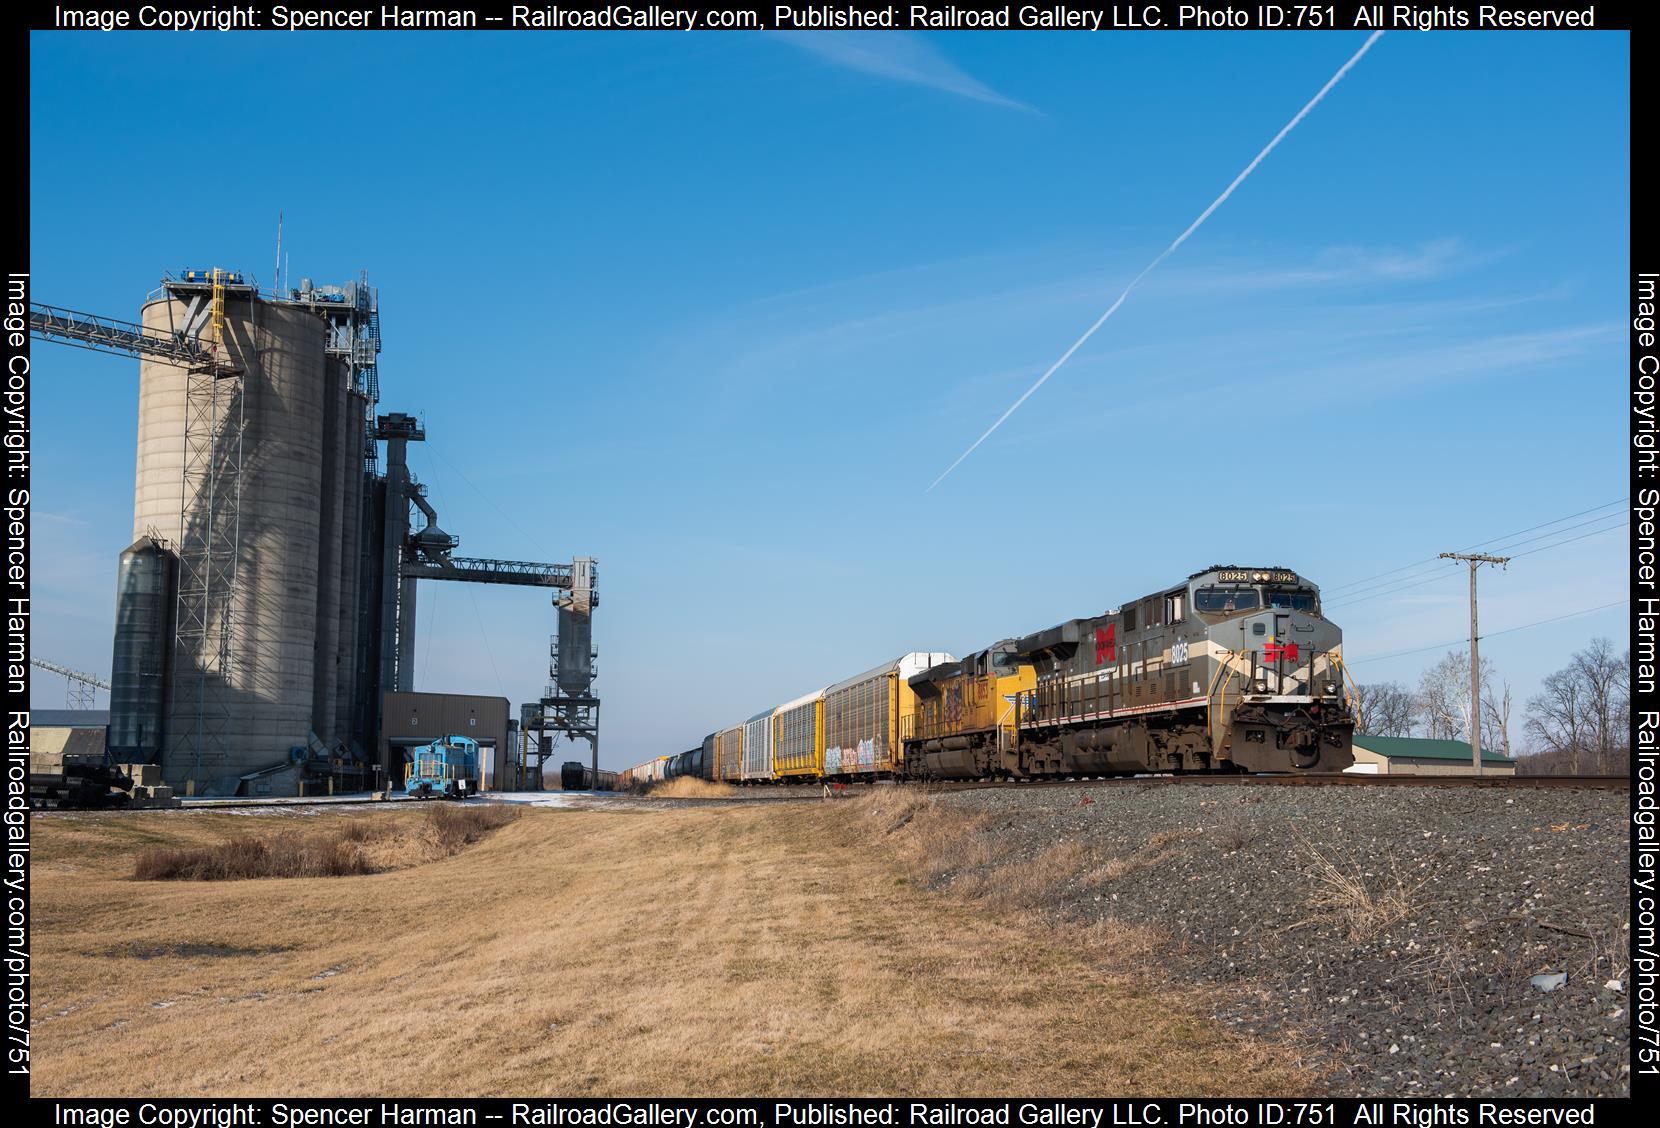 NS 8025 is a class GE ES44AC and  is pictured in Waterloo, Indiana, USA.  This was taken along the Chicago Line on the Norfolk Southern. Photo Copyright: Spencer Harman uploaded to Railroad Gallery on 02/25/2023. This photograph of NS 8025 was taken on Saturday, February 25, 2023. All Rights Reserved. 